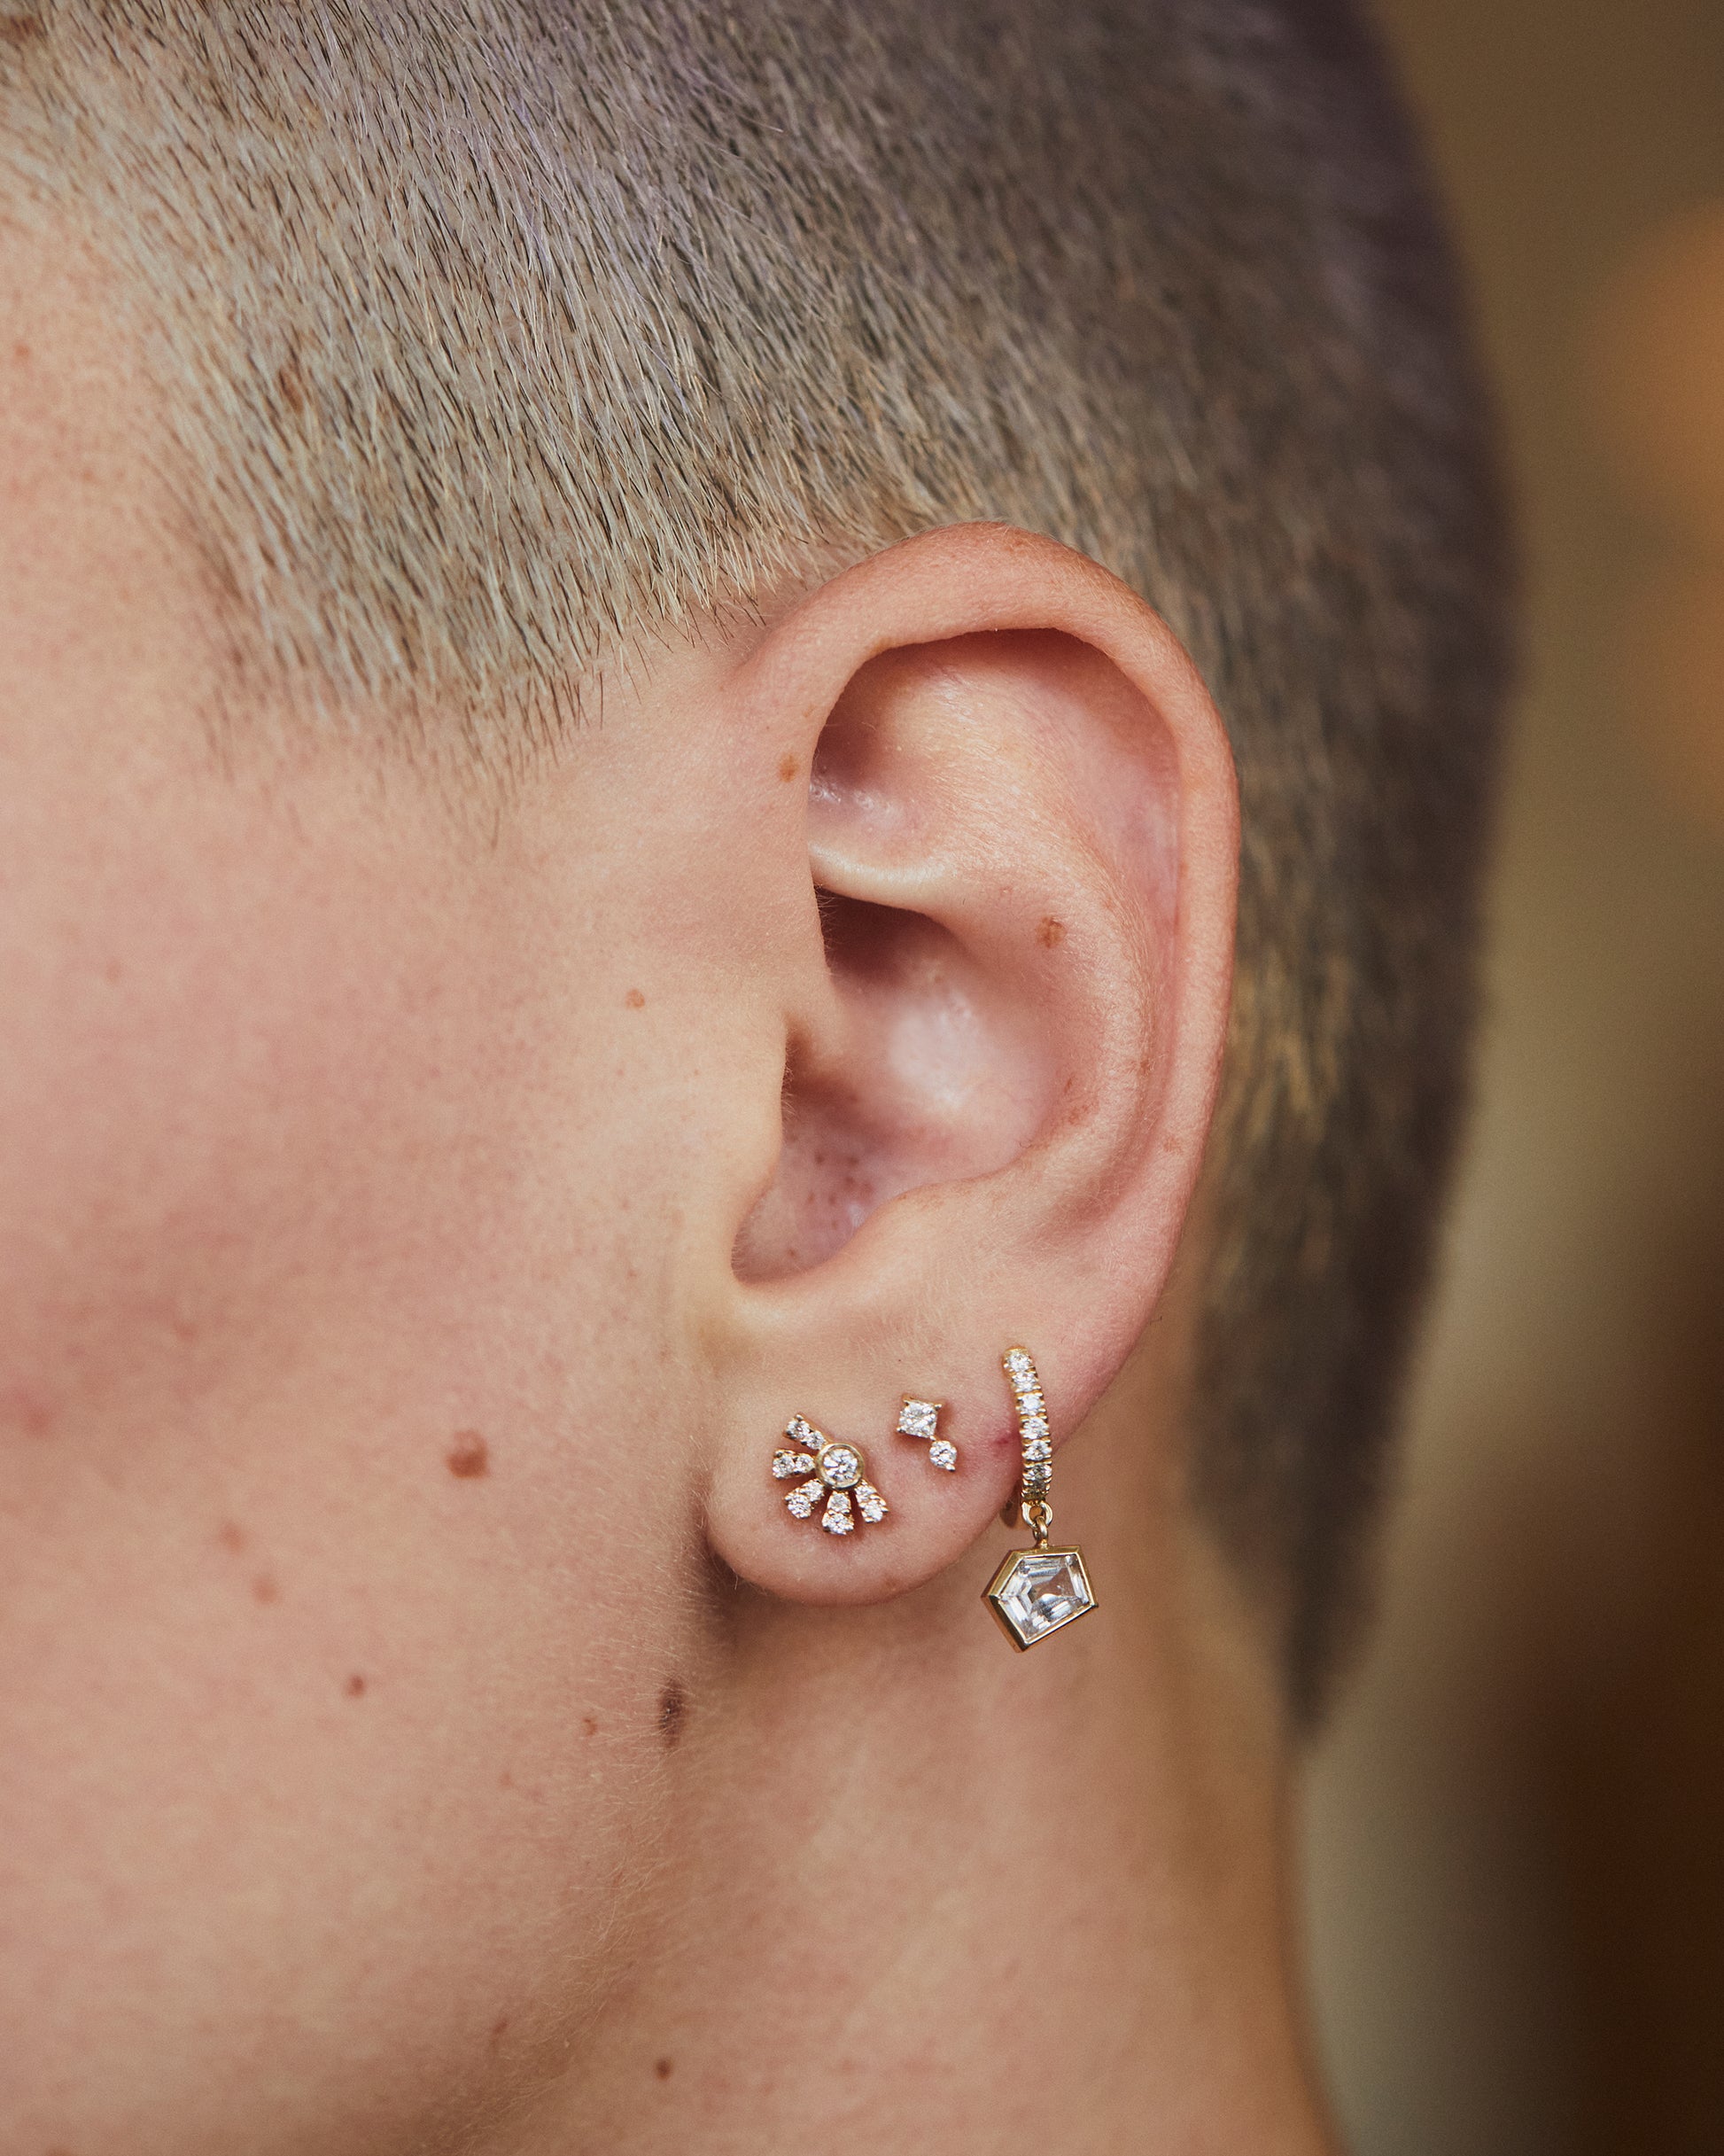 Reminiscent of the sun, this earring is covered in sparkly diamonds.